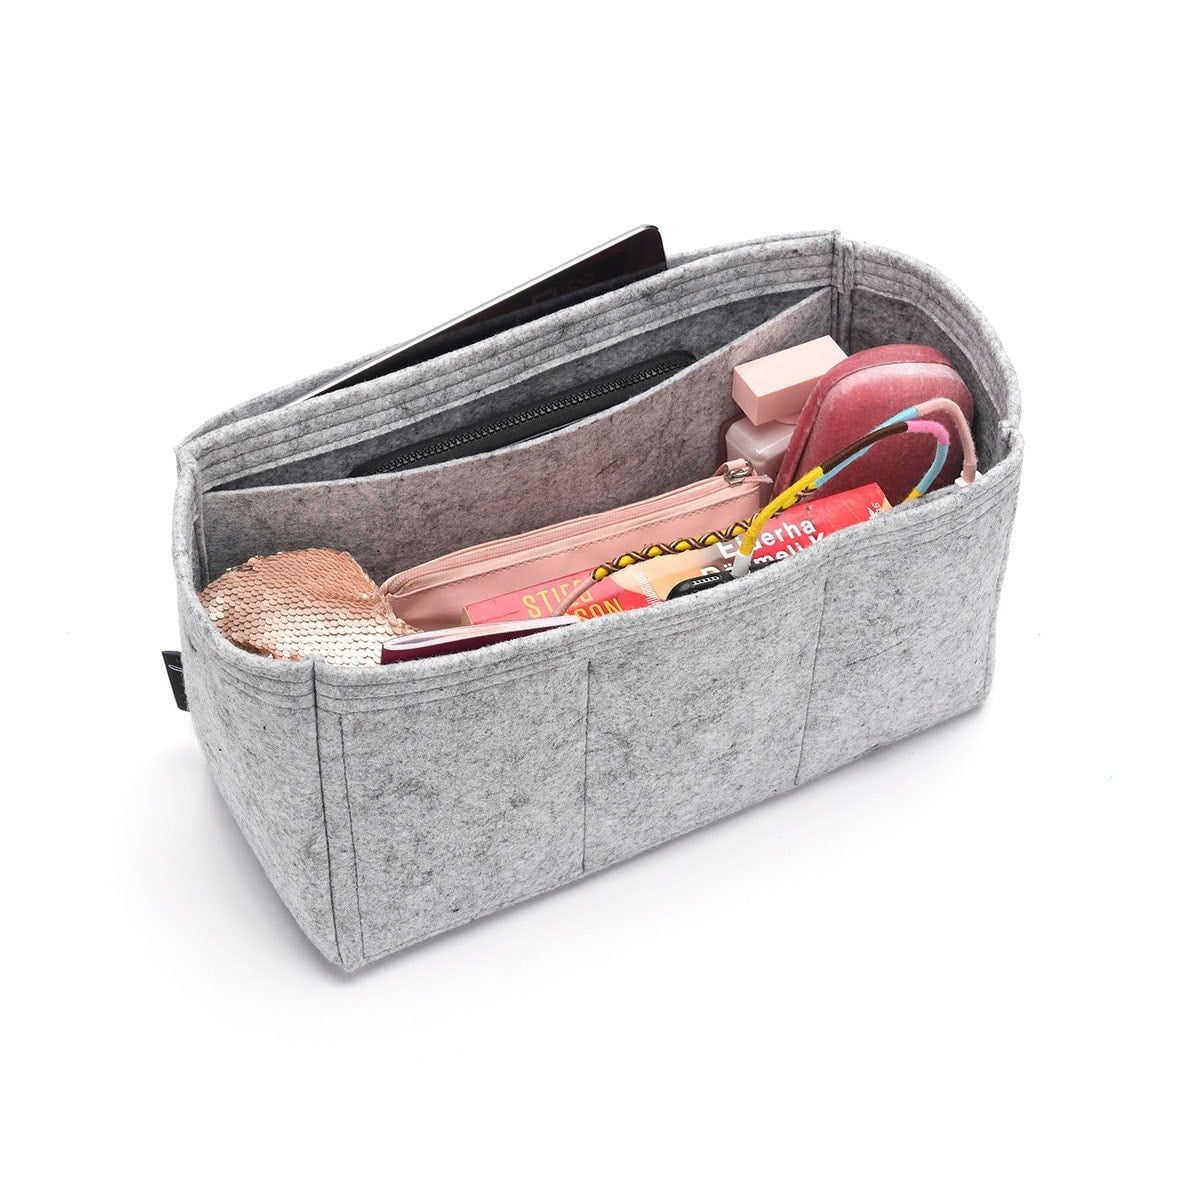 Purse Insert for Hampstead GM Bag Organizer for Hampstead 